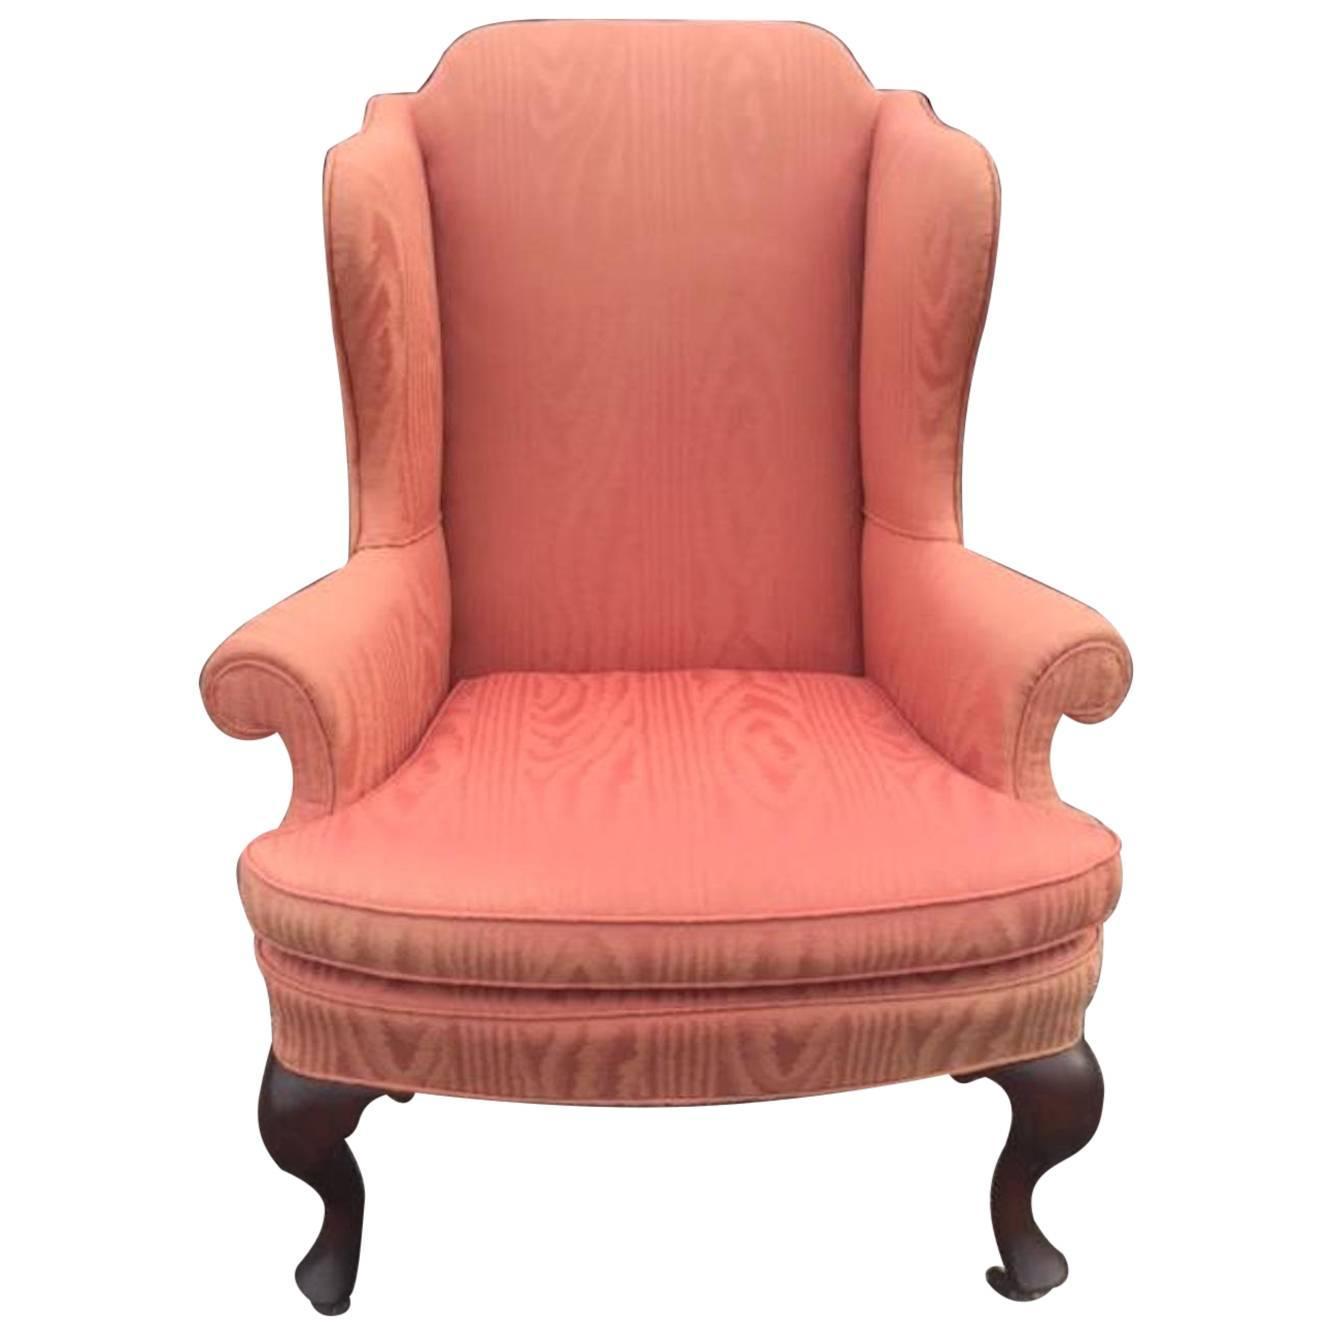 Queen Anne Style Wing Chair Upholstered in Moire, 1935 For ...
